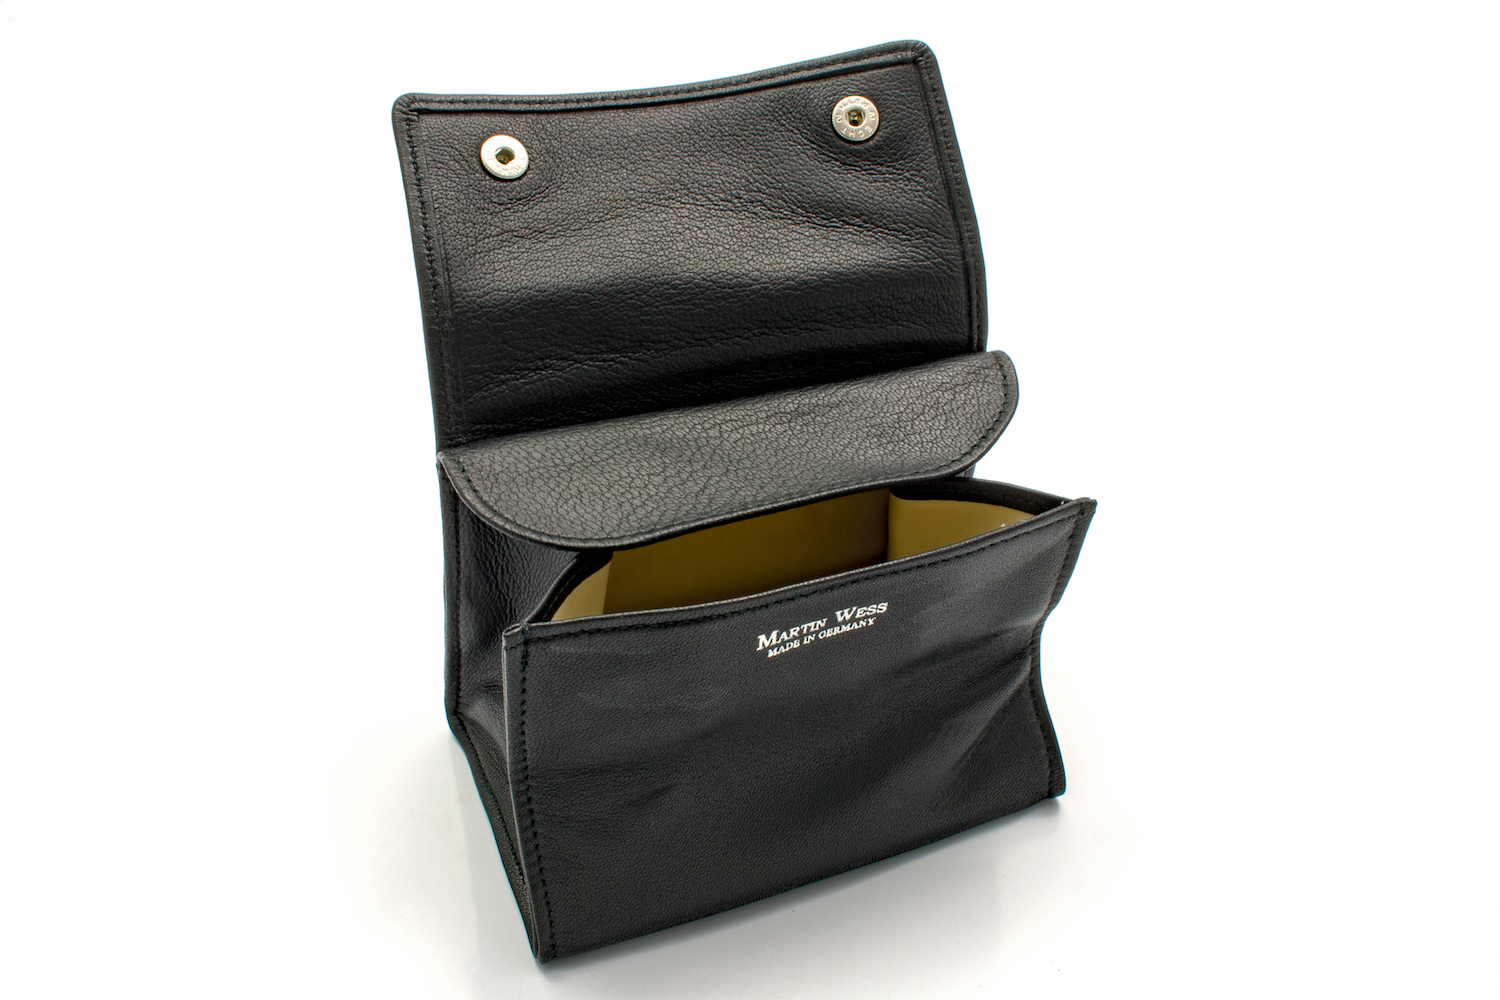 Martin Wess Classic T 15 Stand up Pouch